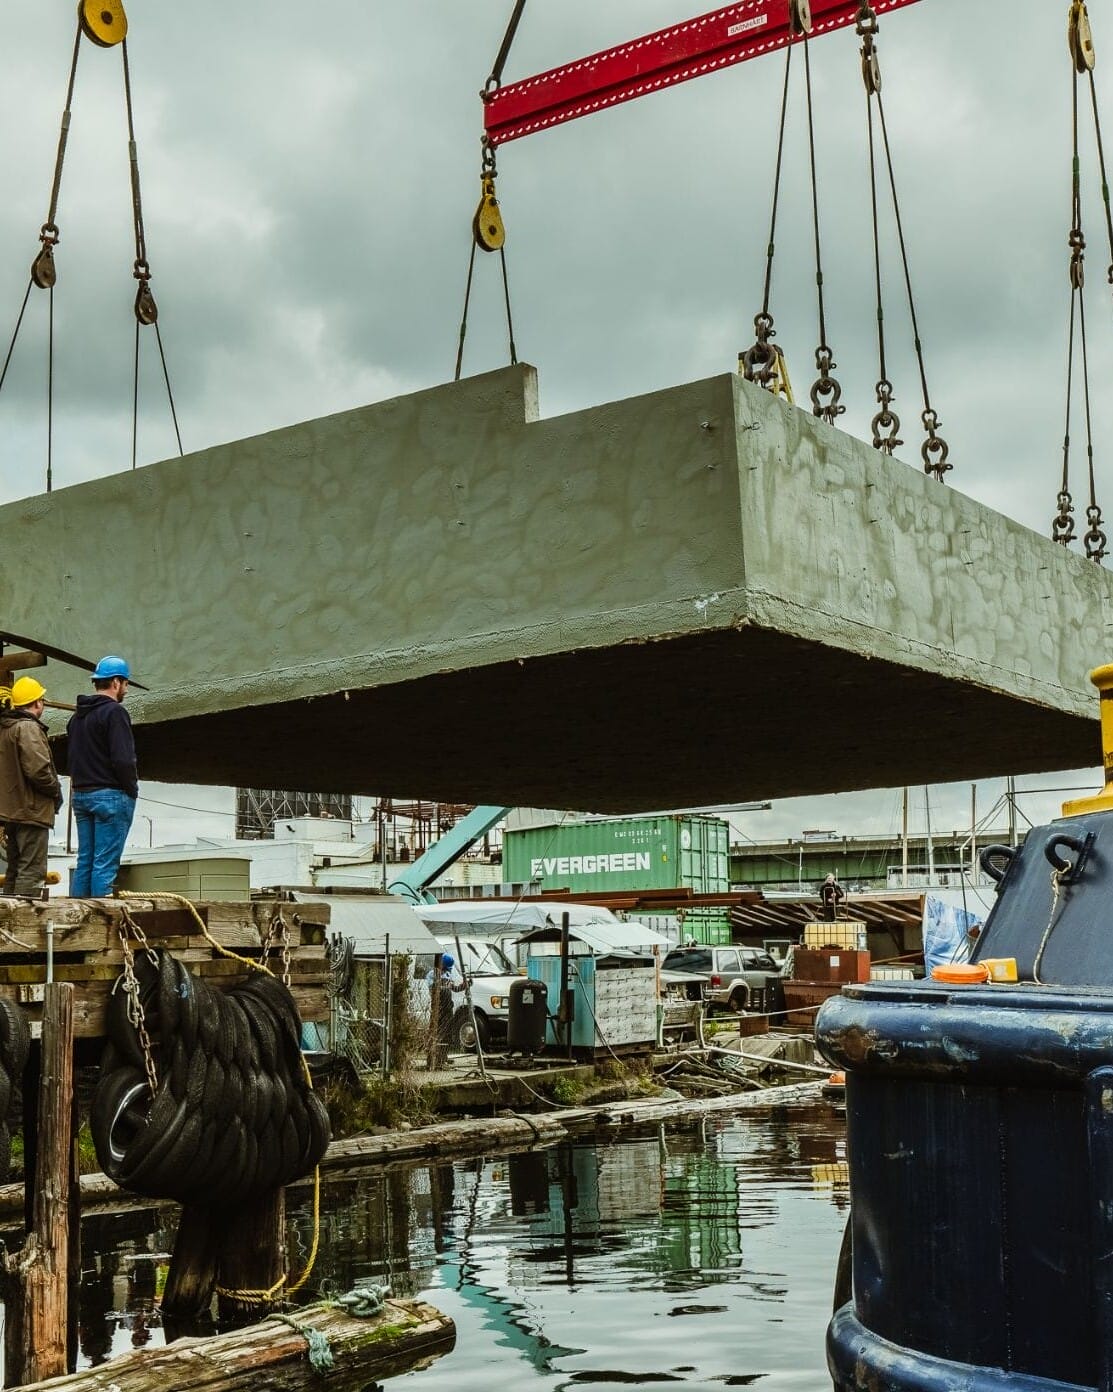 A Floating Homes Contractor is using a crane to lift a large concrete block onto a boat.